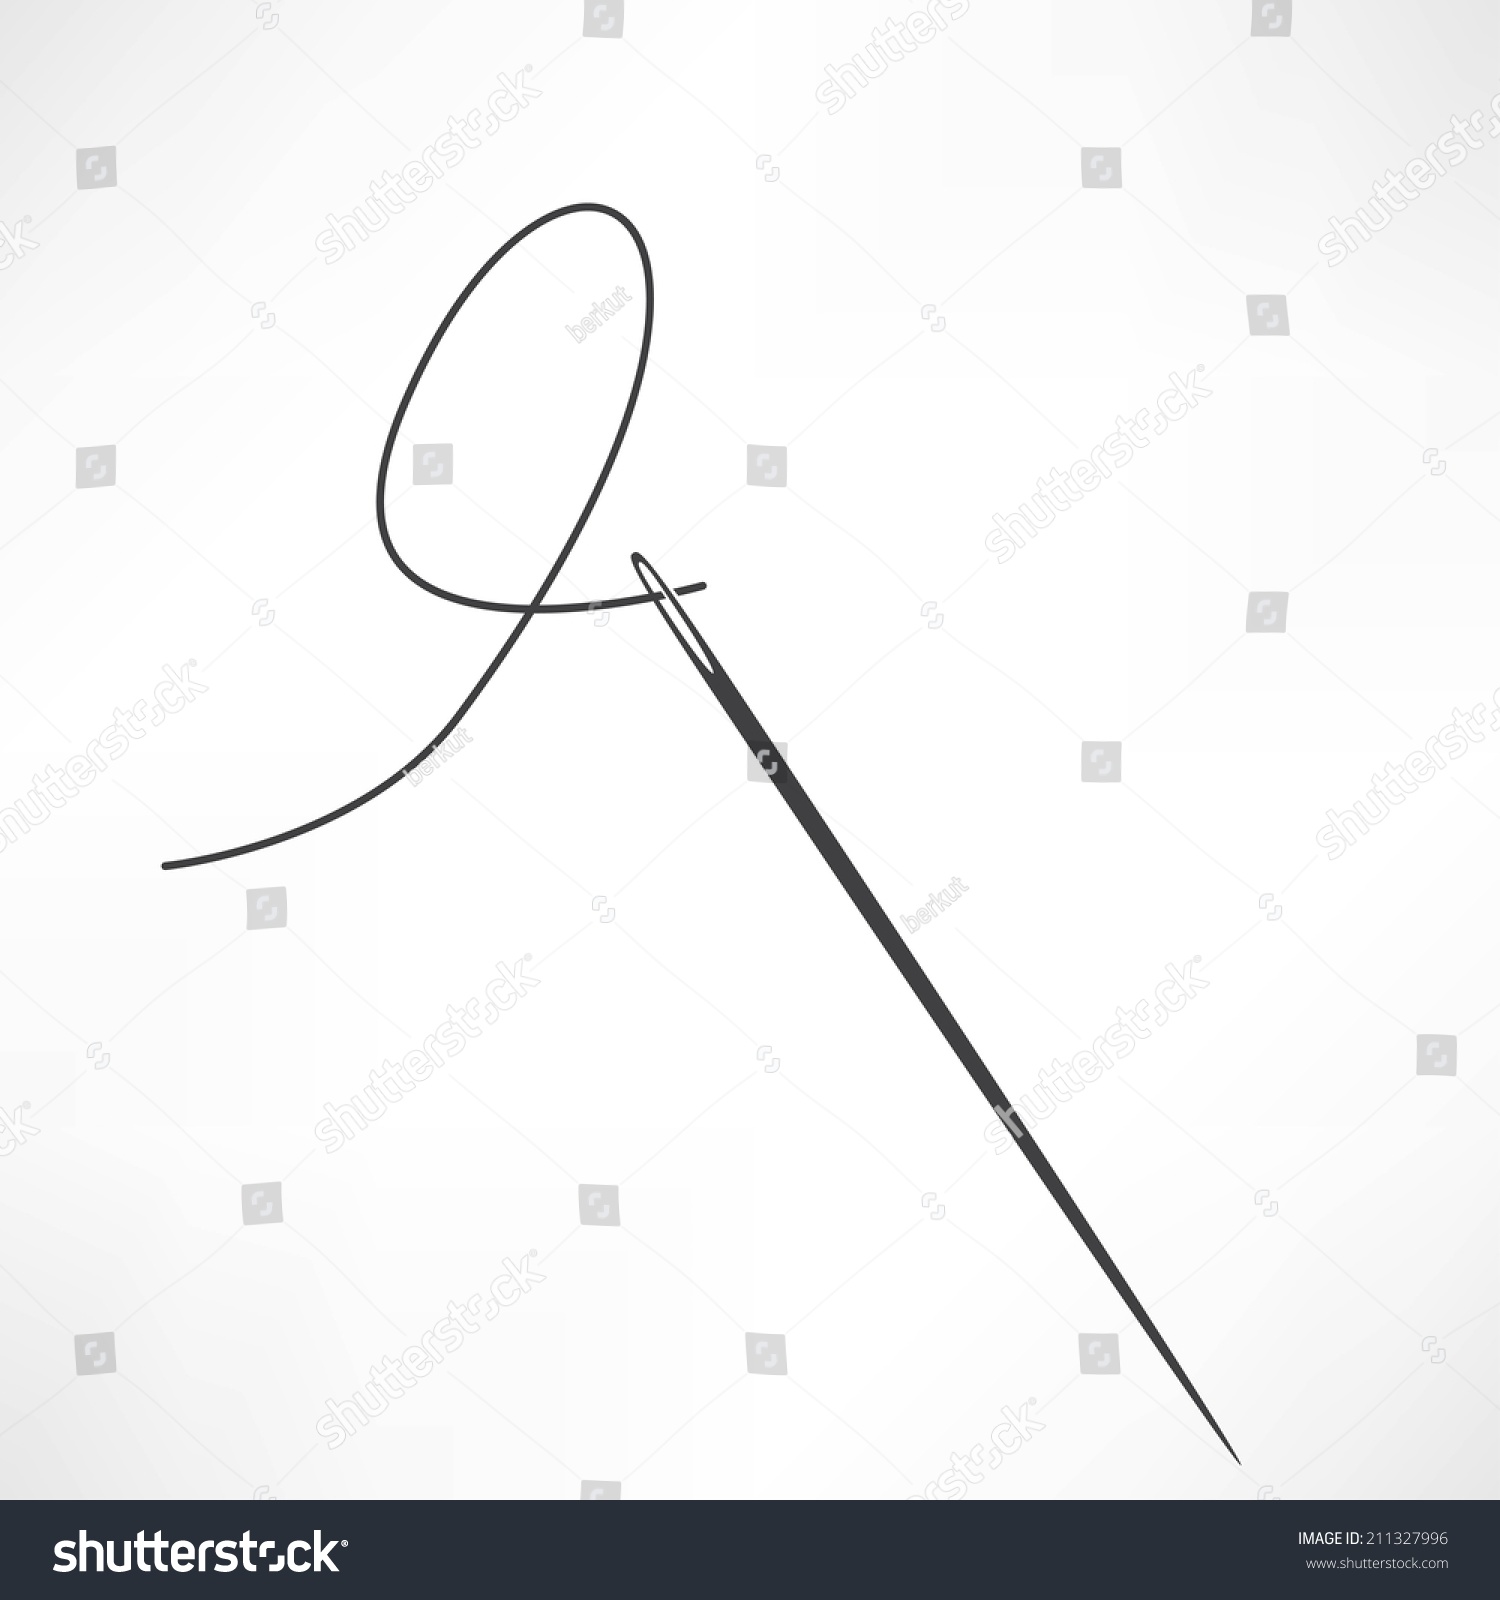 Needle And Thread Vector Icon - 211327996 : Shutterstock